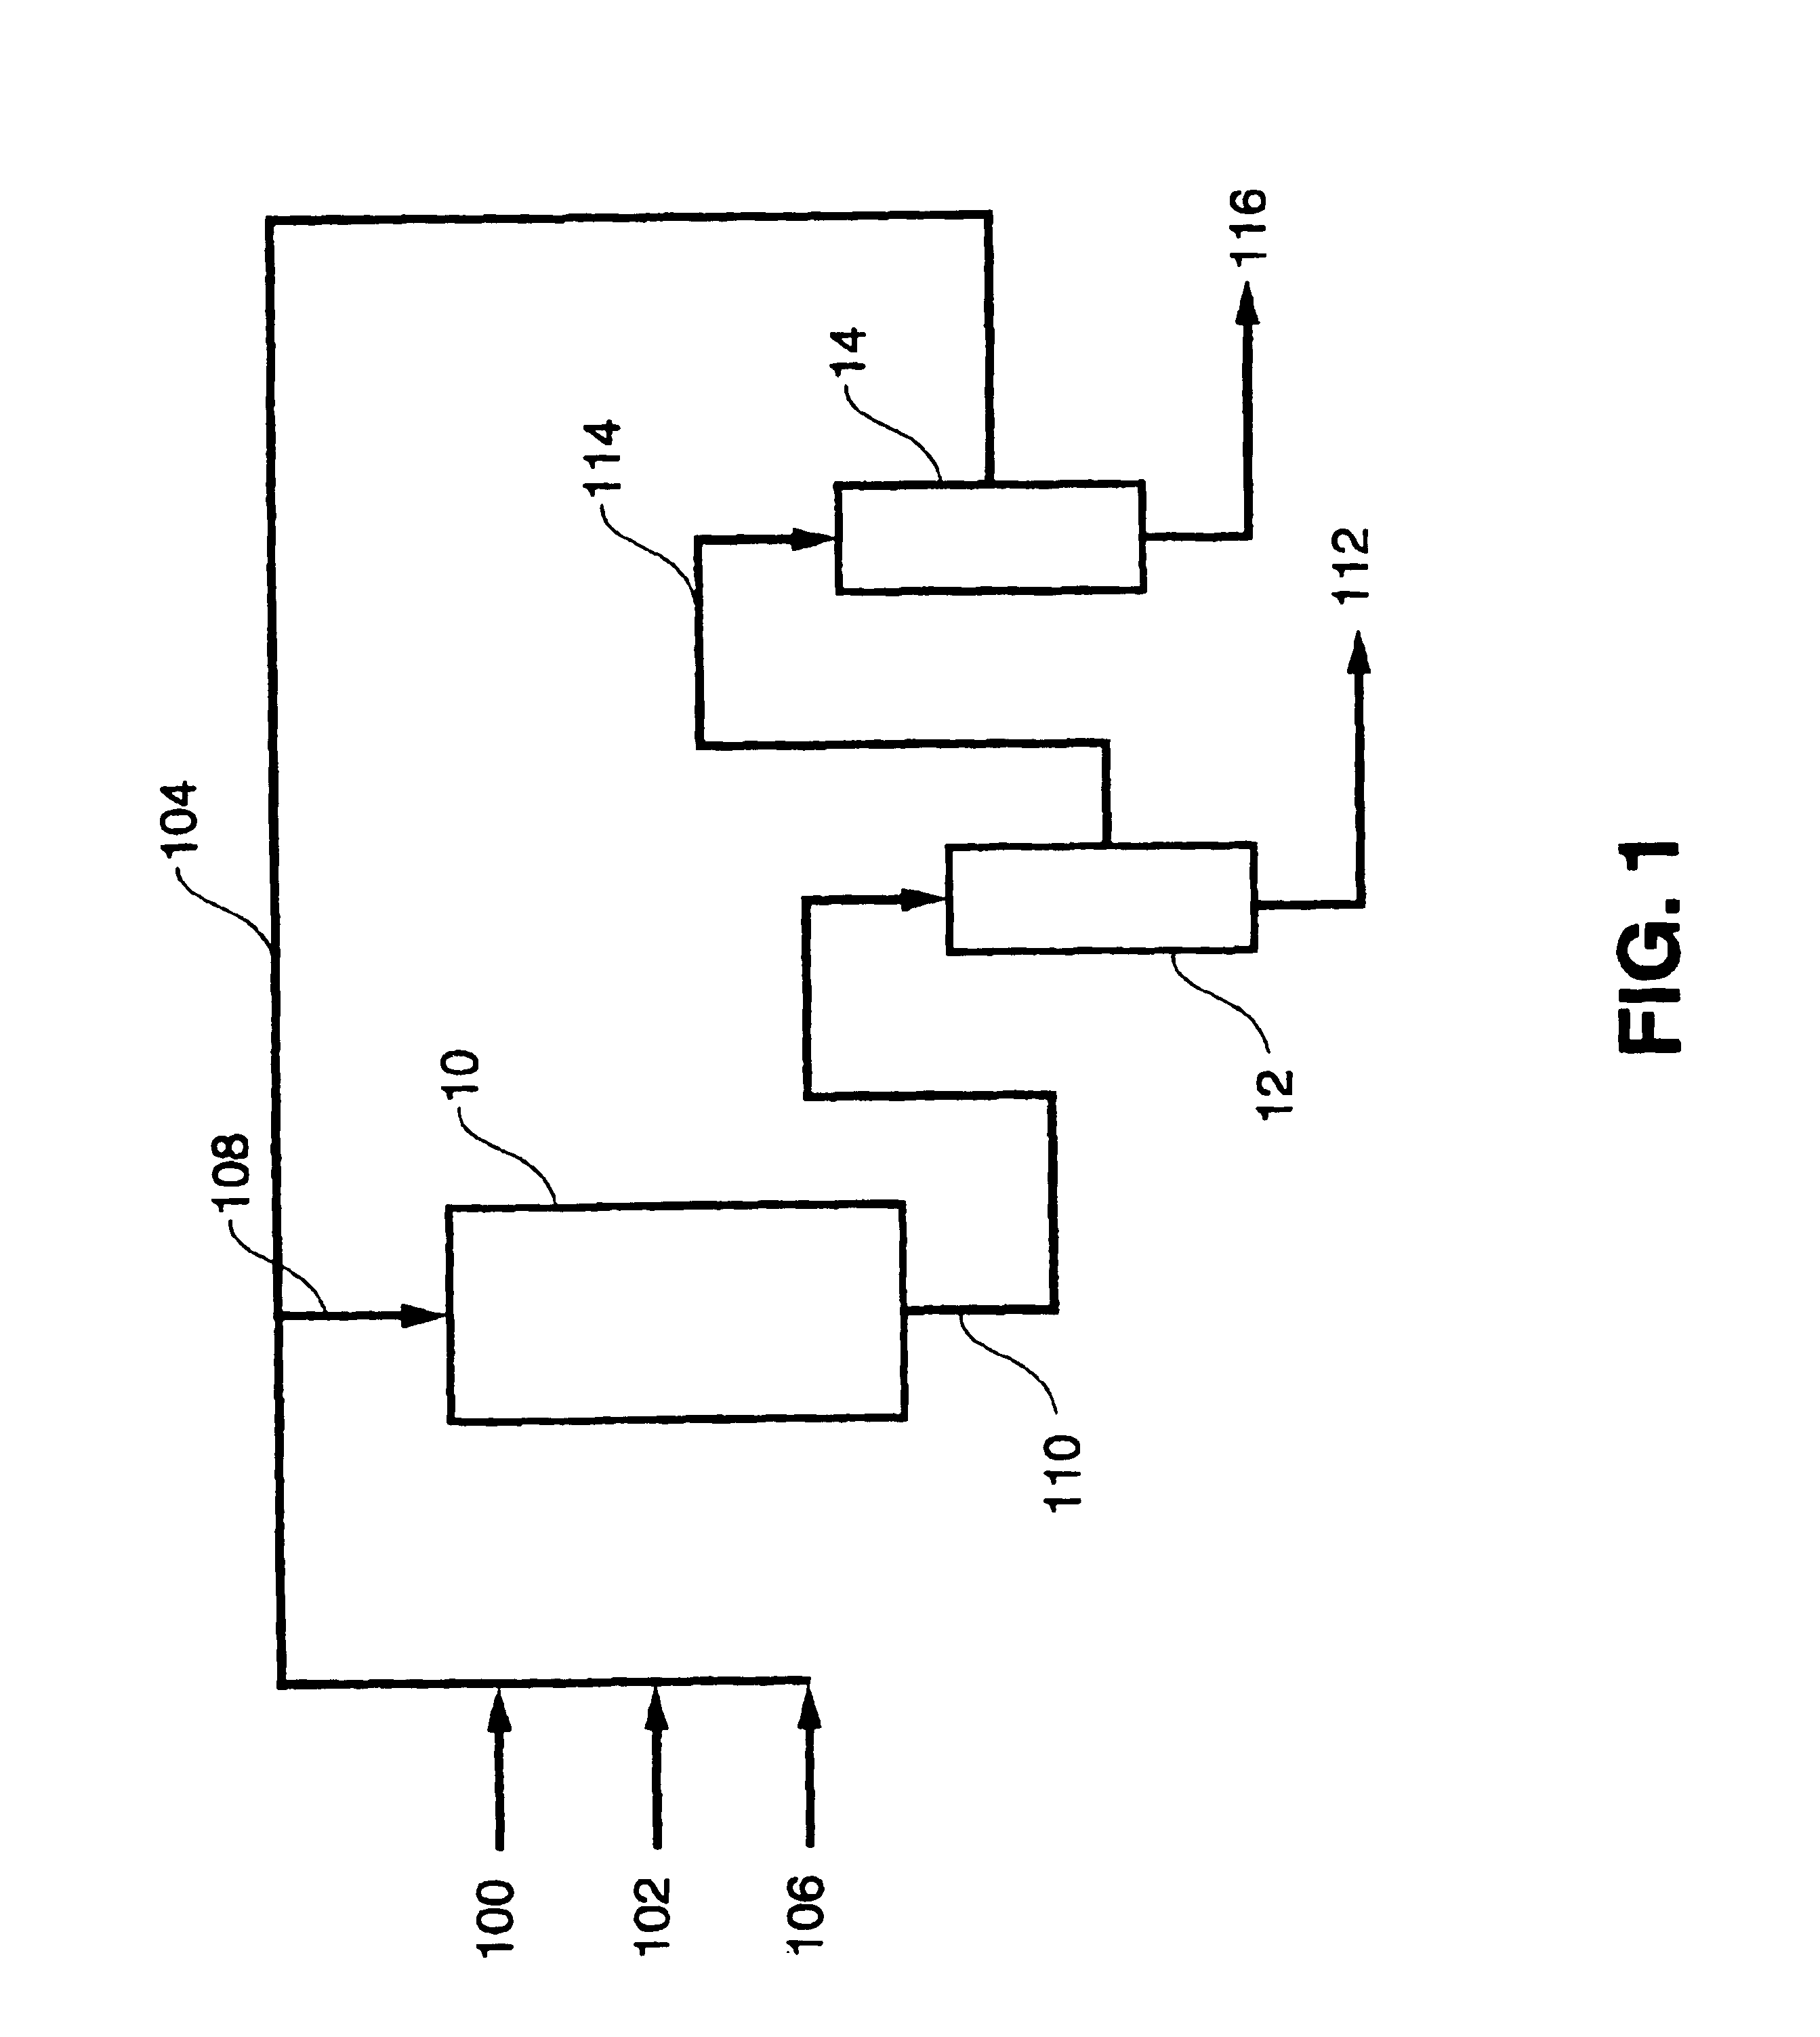 Process for producing biodiesel, lubricants, and fuel and lubricant additives in a critical fluid medium